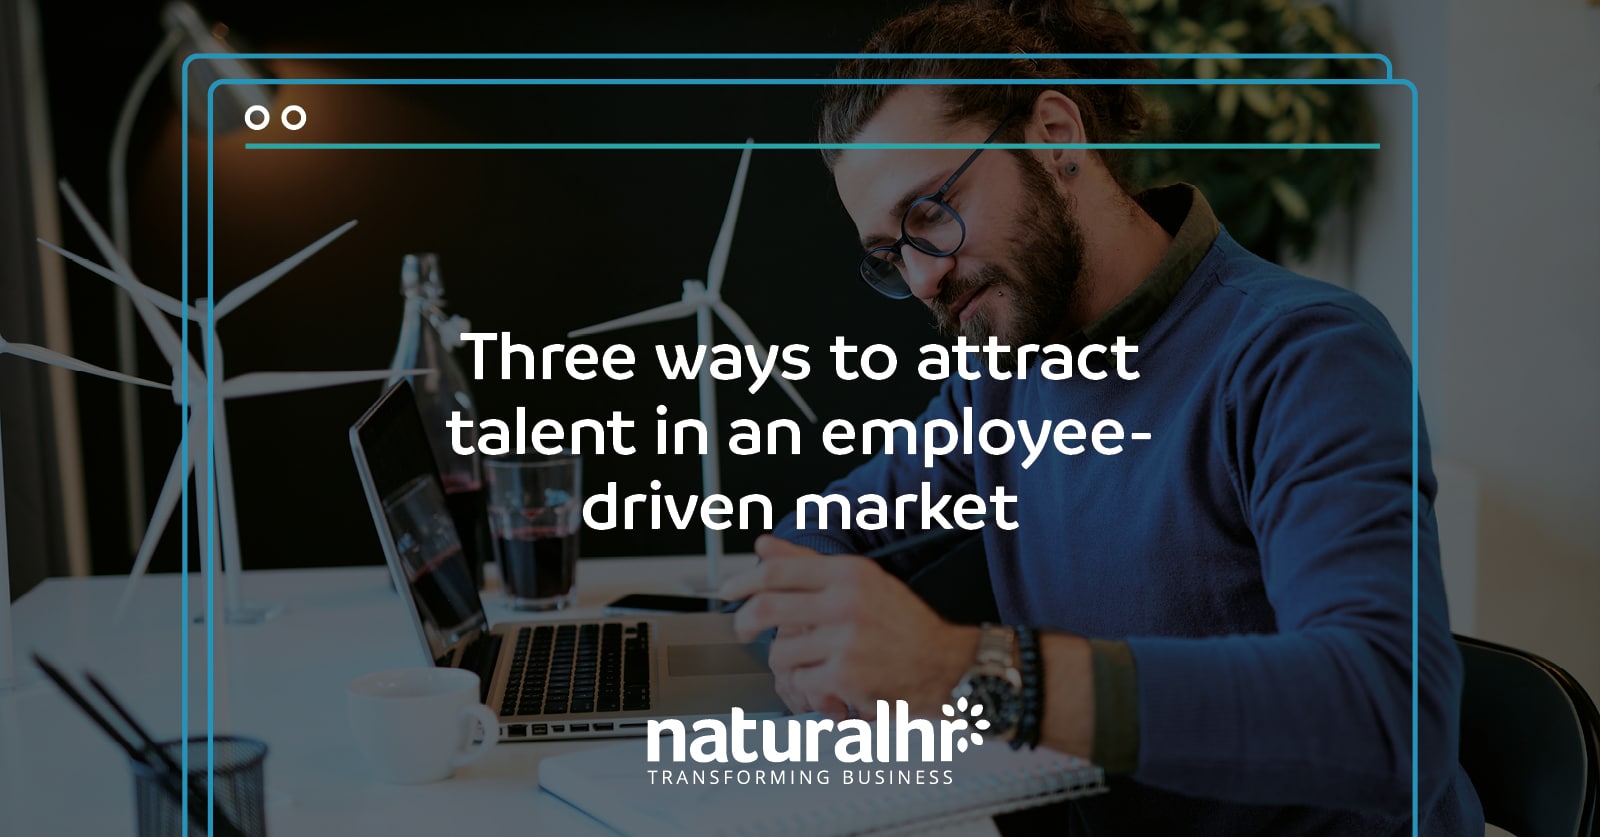 Three ways to attract talent in an employee-driven market